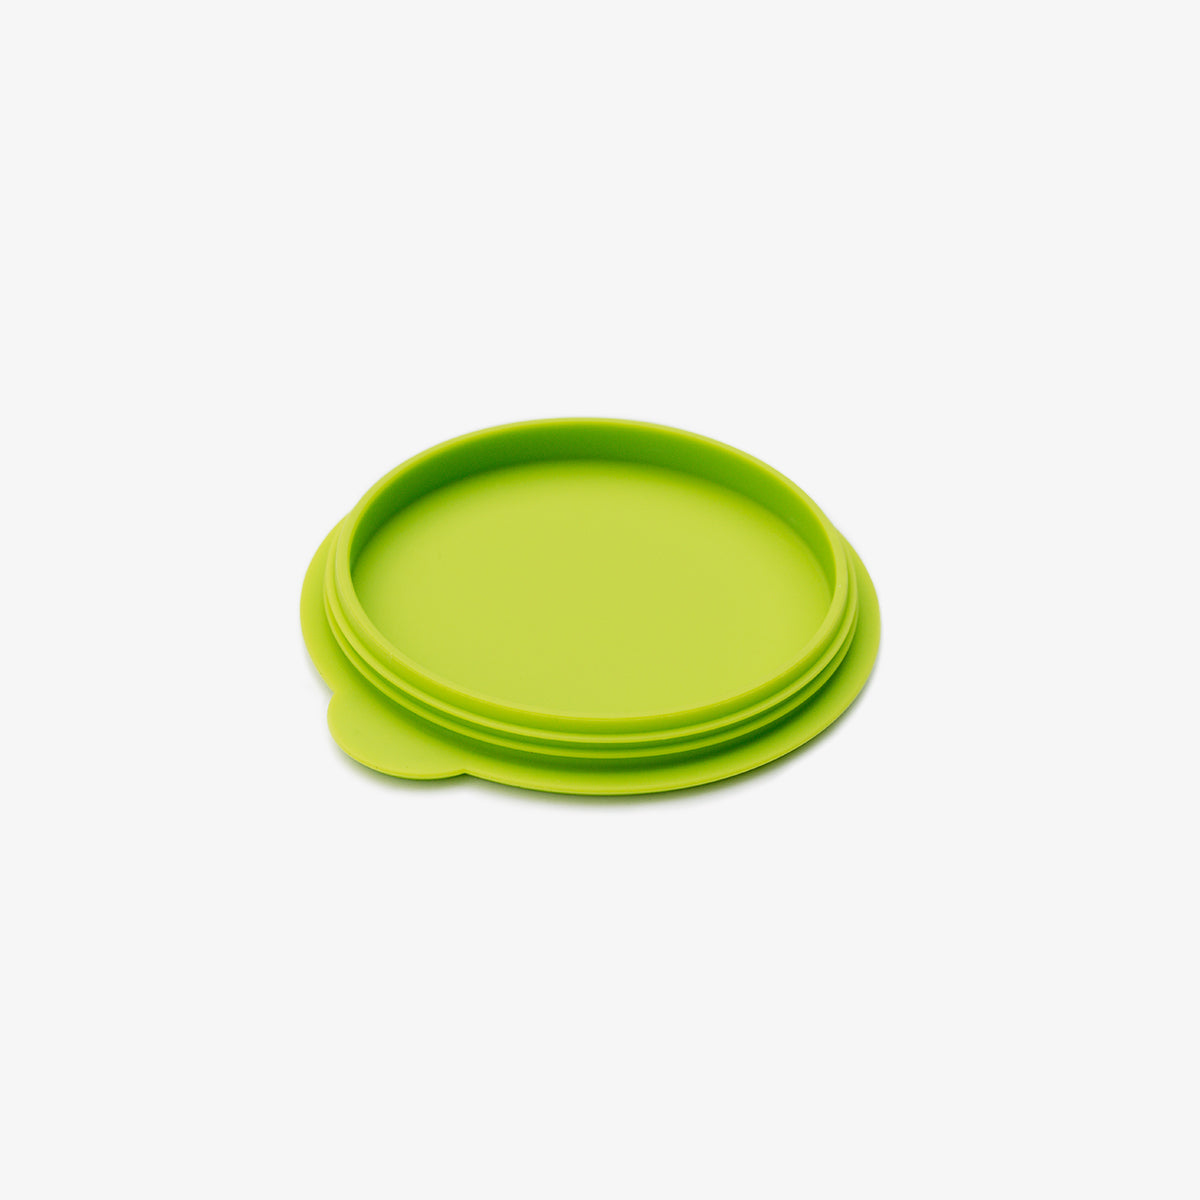 Tiny Bowl Lid in Lime / Storage Lids for the Tiny Bowl by ezpz / Silicone Lid for Baby Bowl